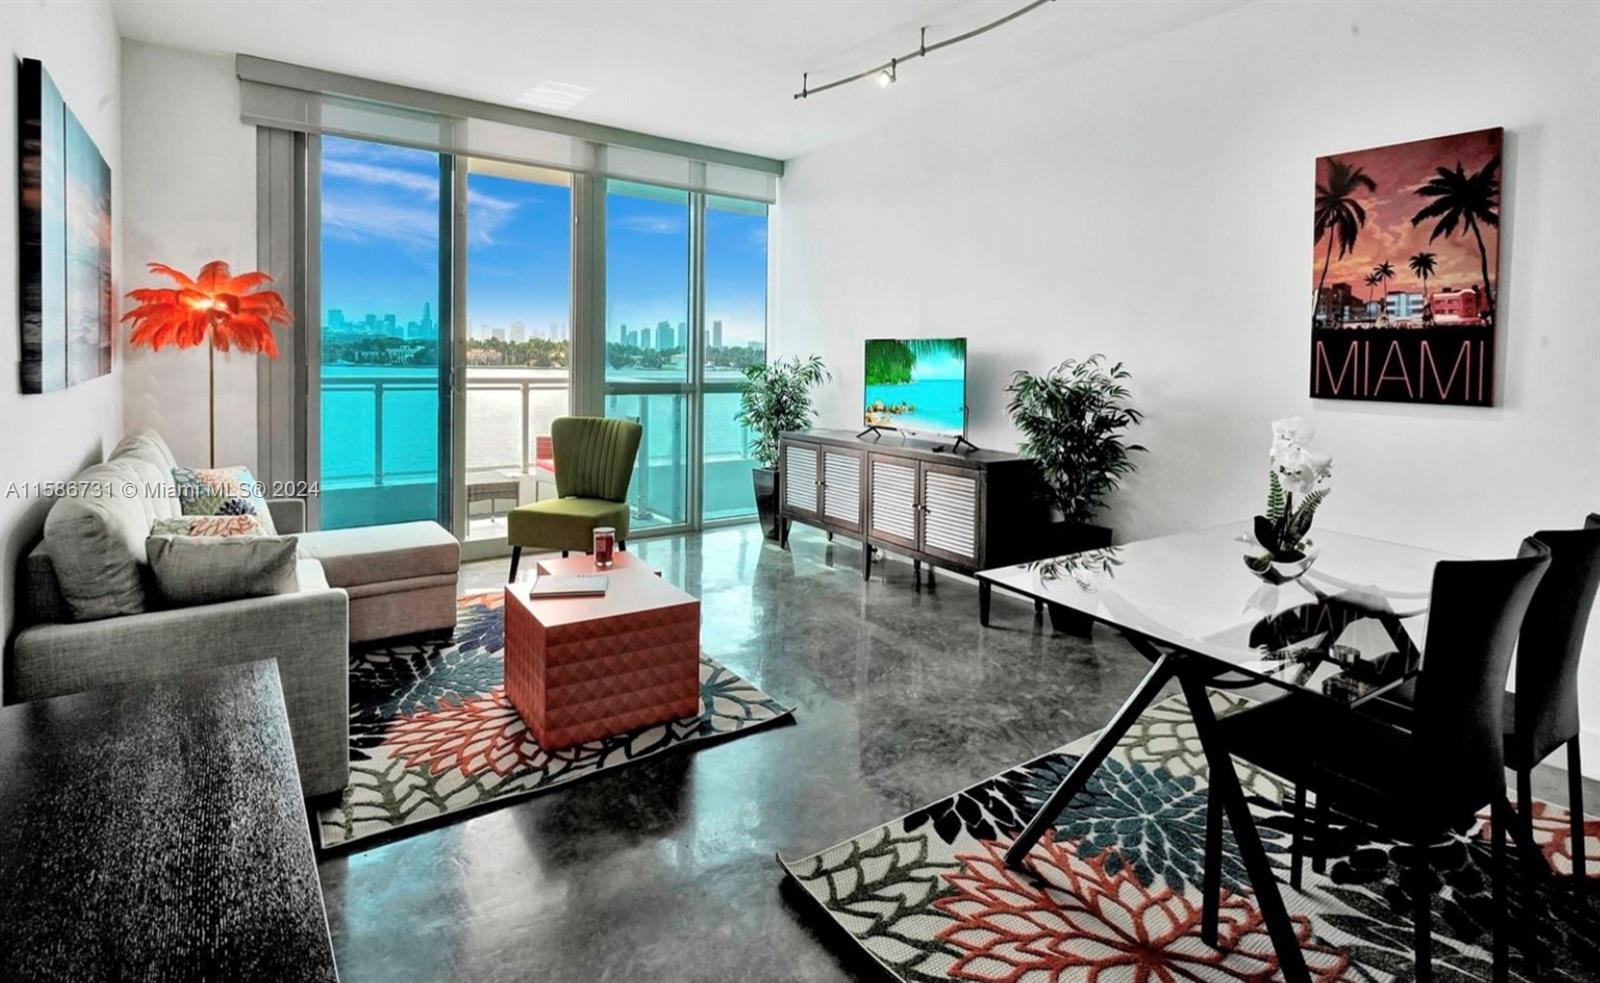 Experience this Bayside 1BR/1BA corner unit at Bentley Bay featuring a bayside terrace offering stunning, unobstructed views of Biscayne Bay, the Miami skyline, & beautiful sunsets. Unit sports an open living & dining floor plan, a charming kitchen, all with water & city views. The bedroom includes access to the bayside terrace, a walk-in closet w/built-ins, & additional wall closet space. The bathroom boasts a sunken Jacuzzi tub, & a glass walk-in shower. Prime location with access to fine restaurants, boutiques, entertainment, & beach. A minute’s drive to downtown Miami, art, sports & cultural venues, and Miami International Airport. Great amenities: 24-hour valet parking, concierge services & security, sun deck, infinity-edge pool, 2 Jacuzzi's, fitness center - steam room, sauna & spa.